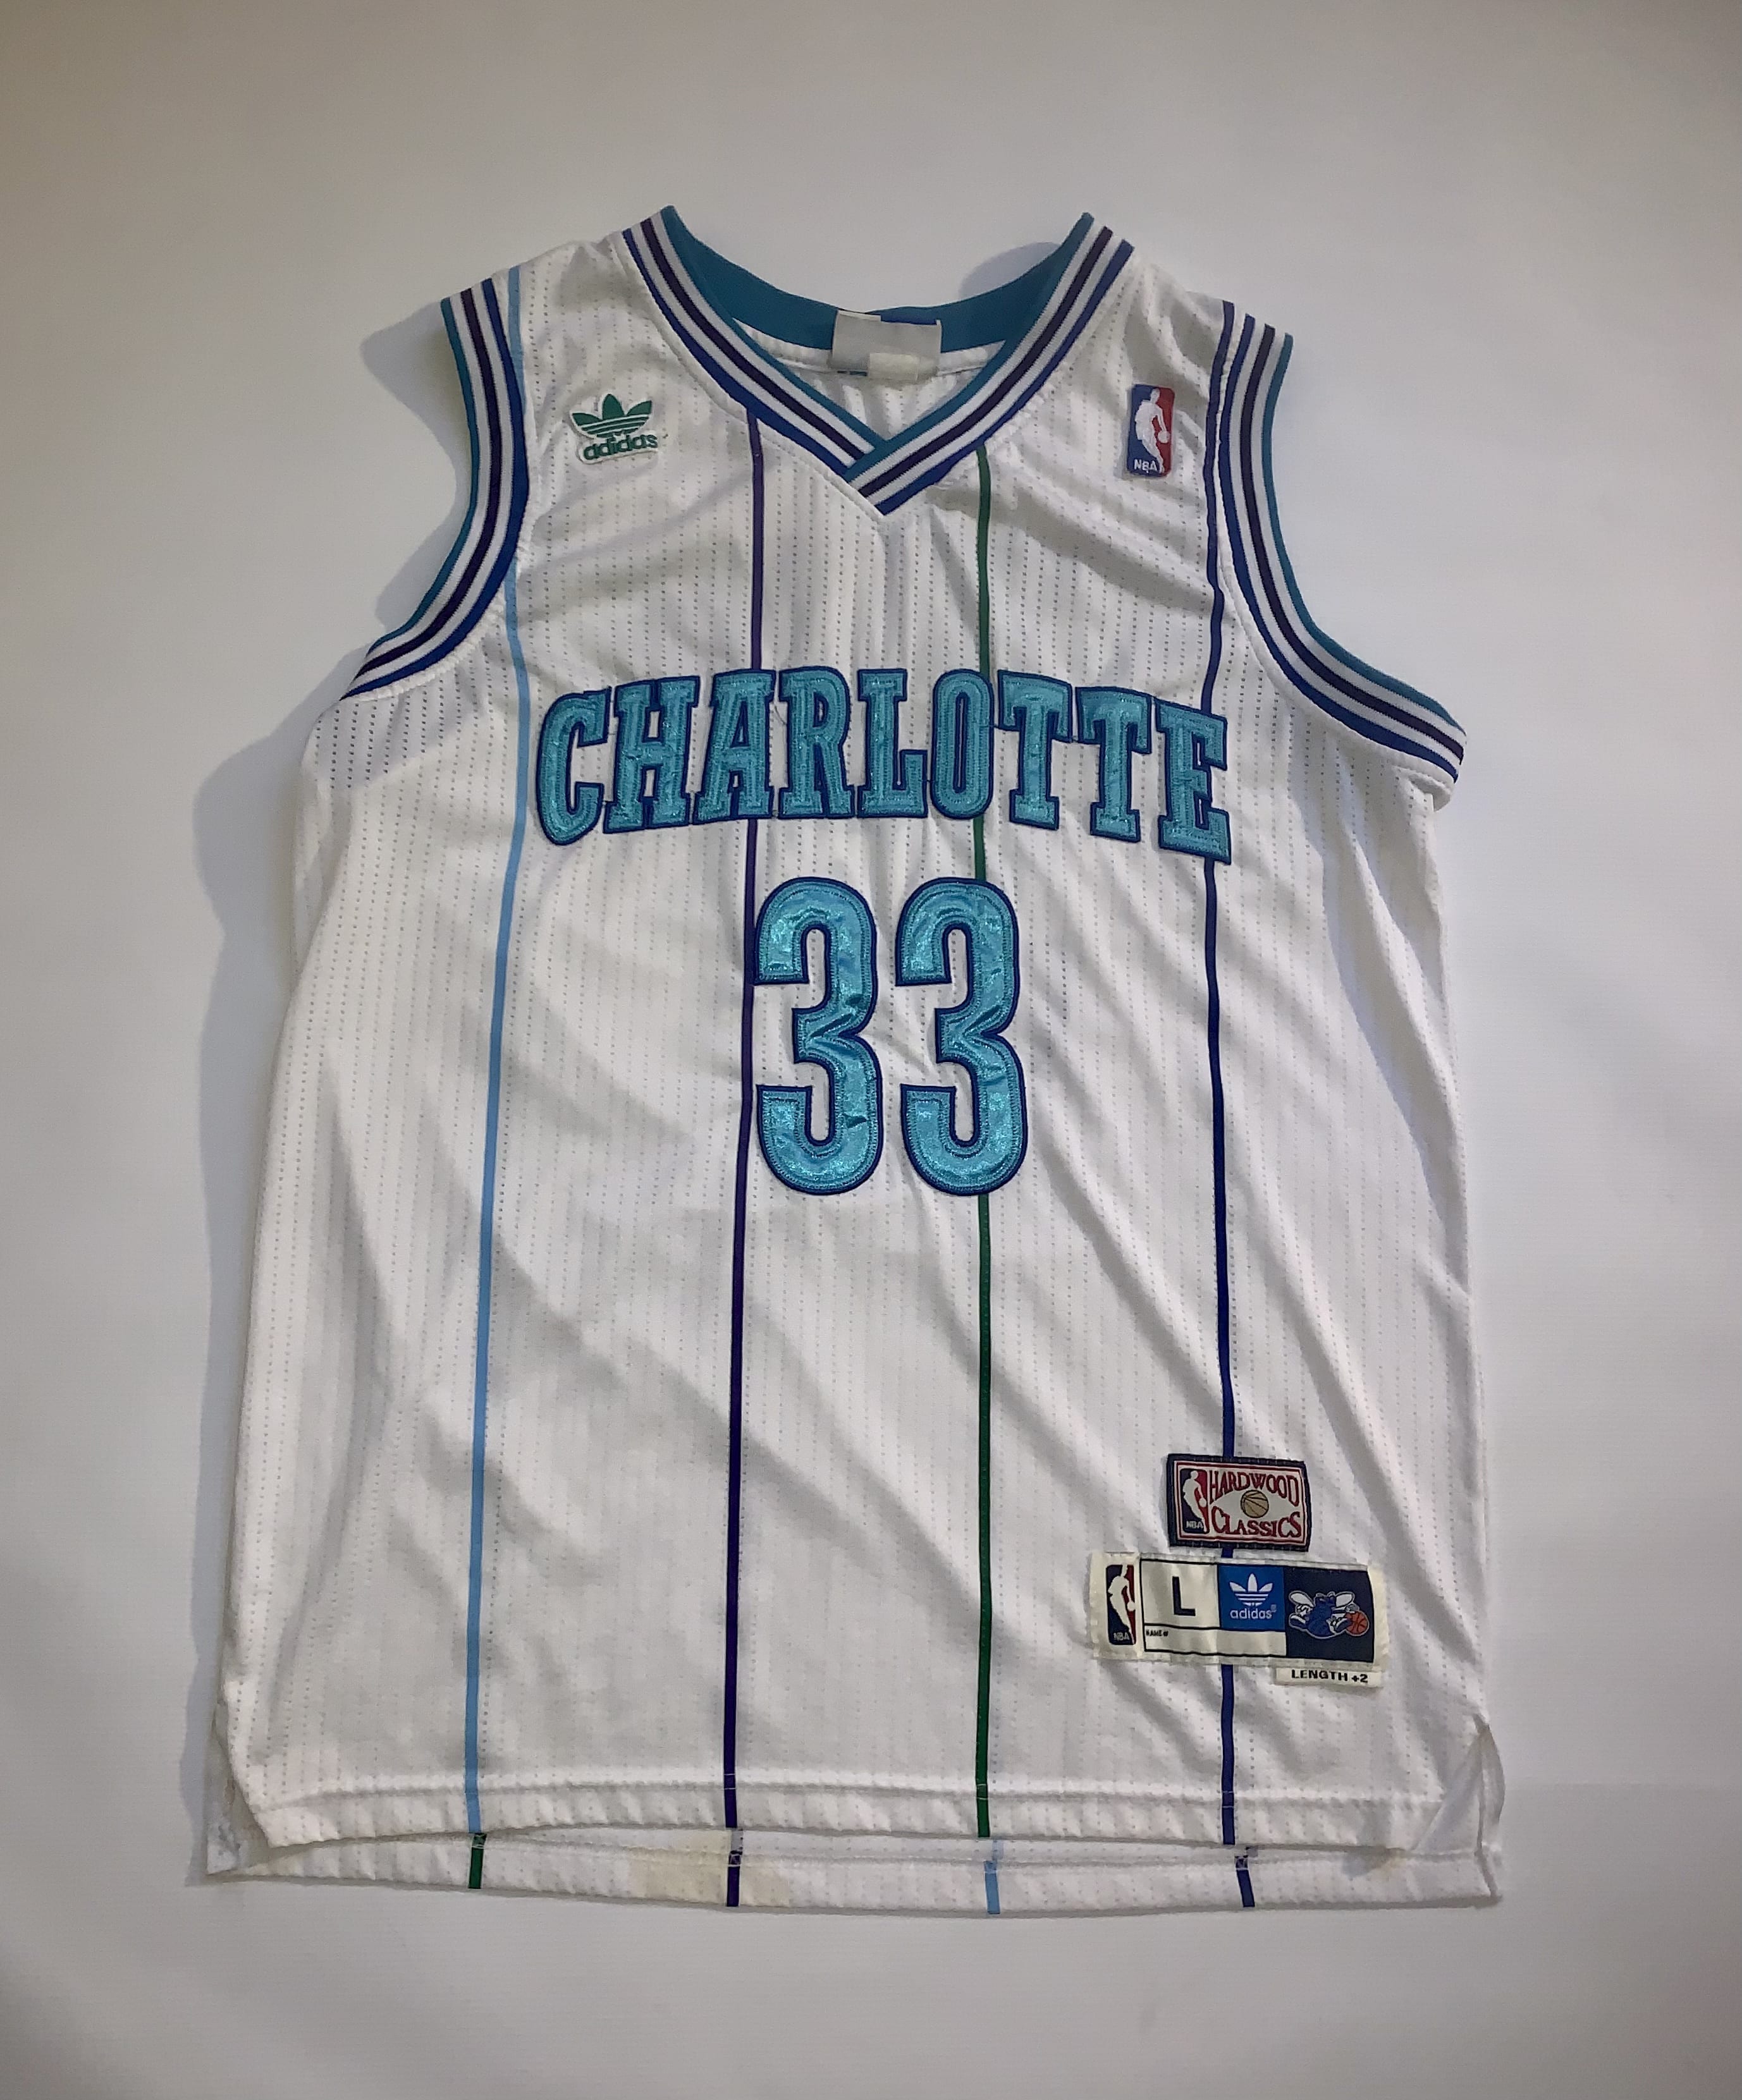 mourning hornets jersey